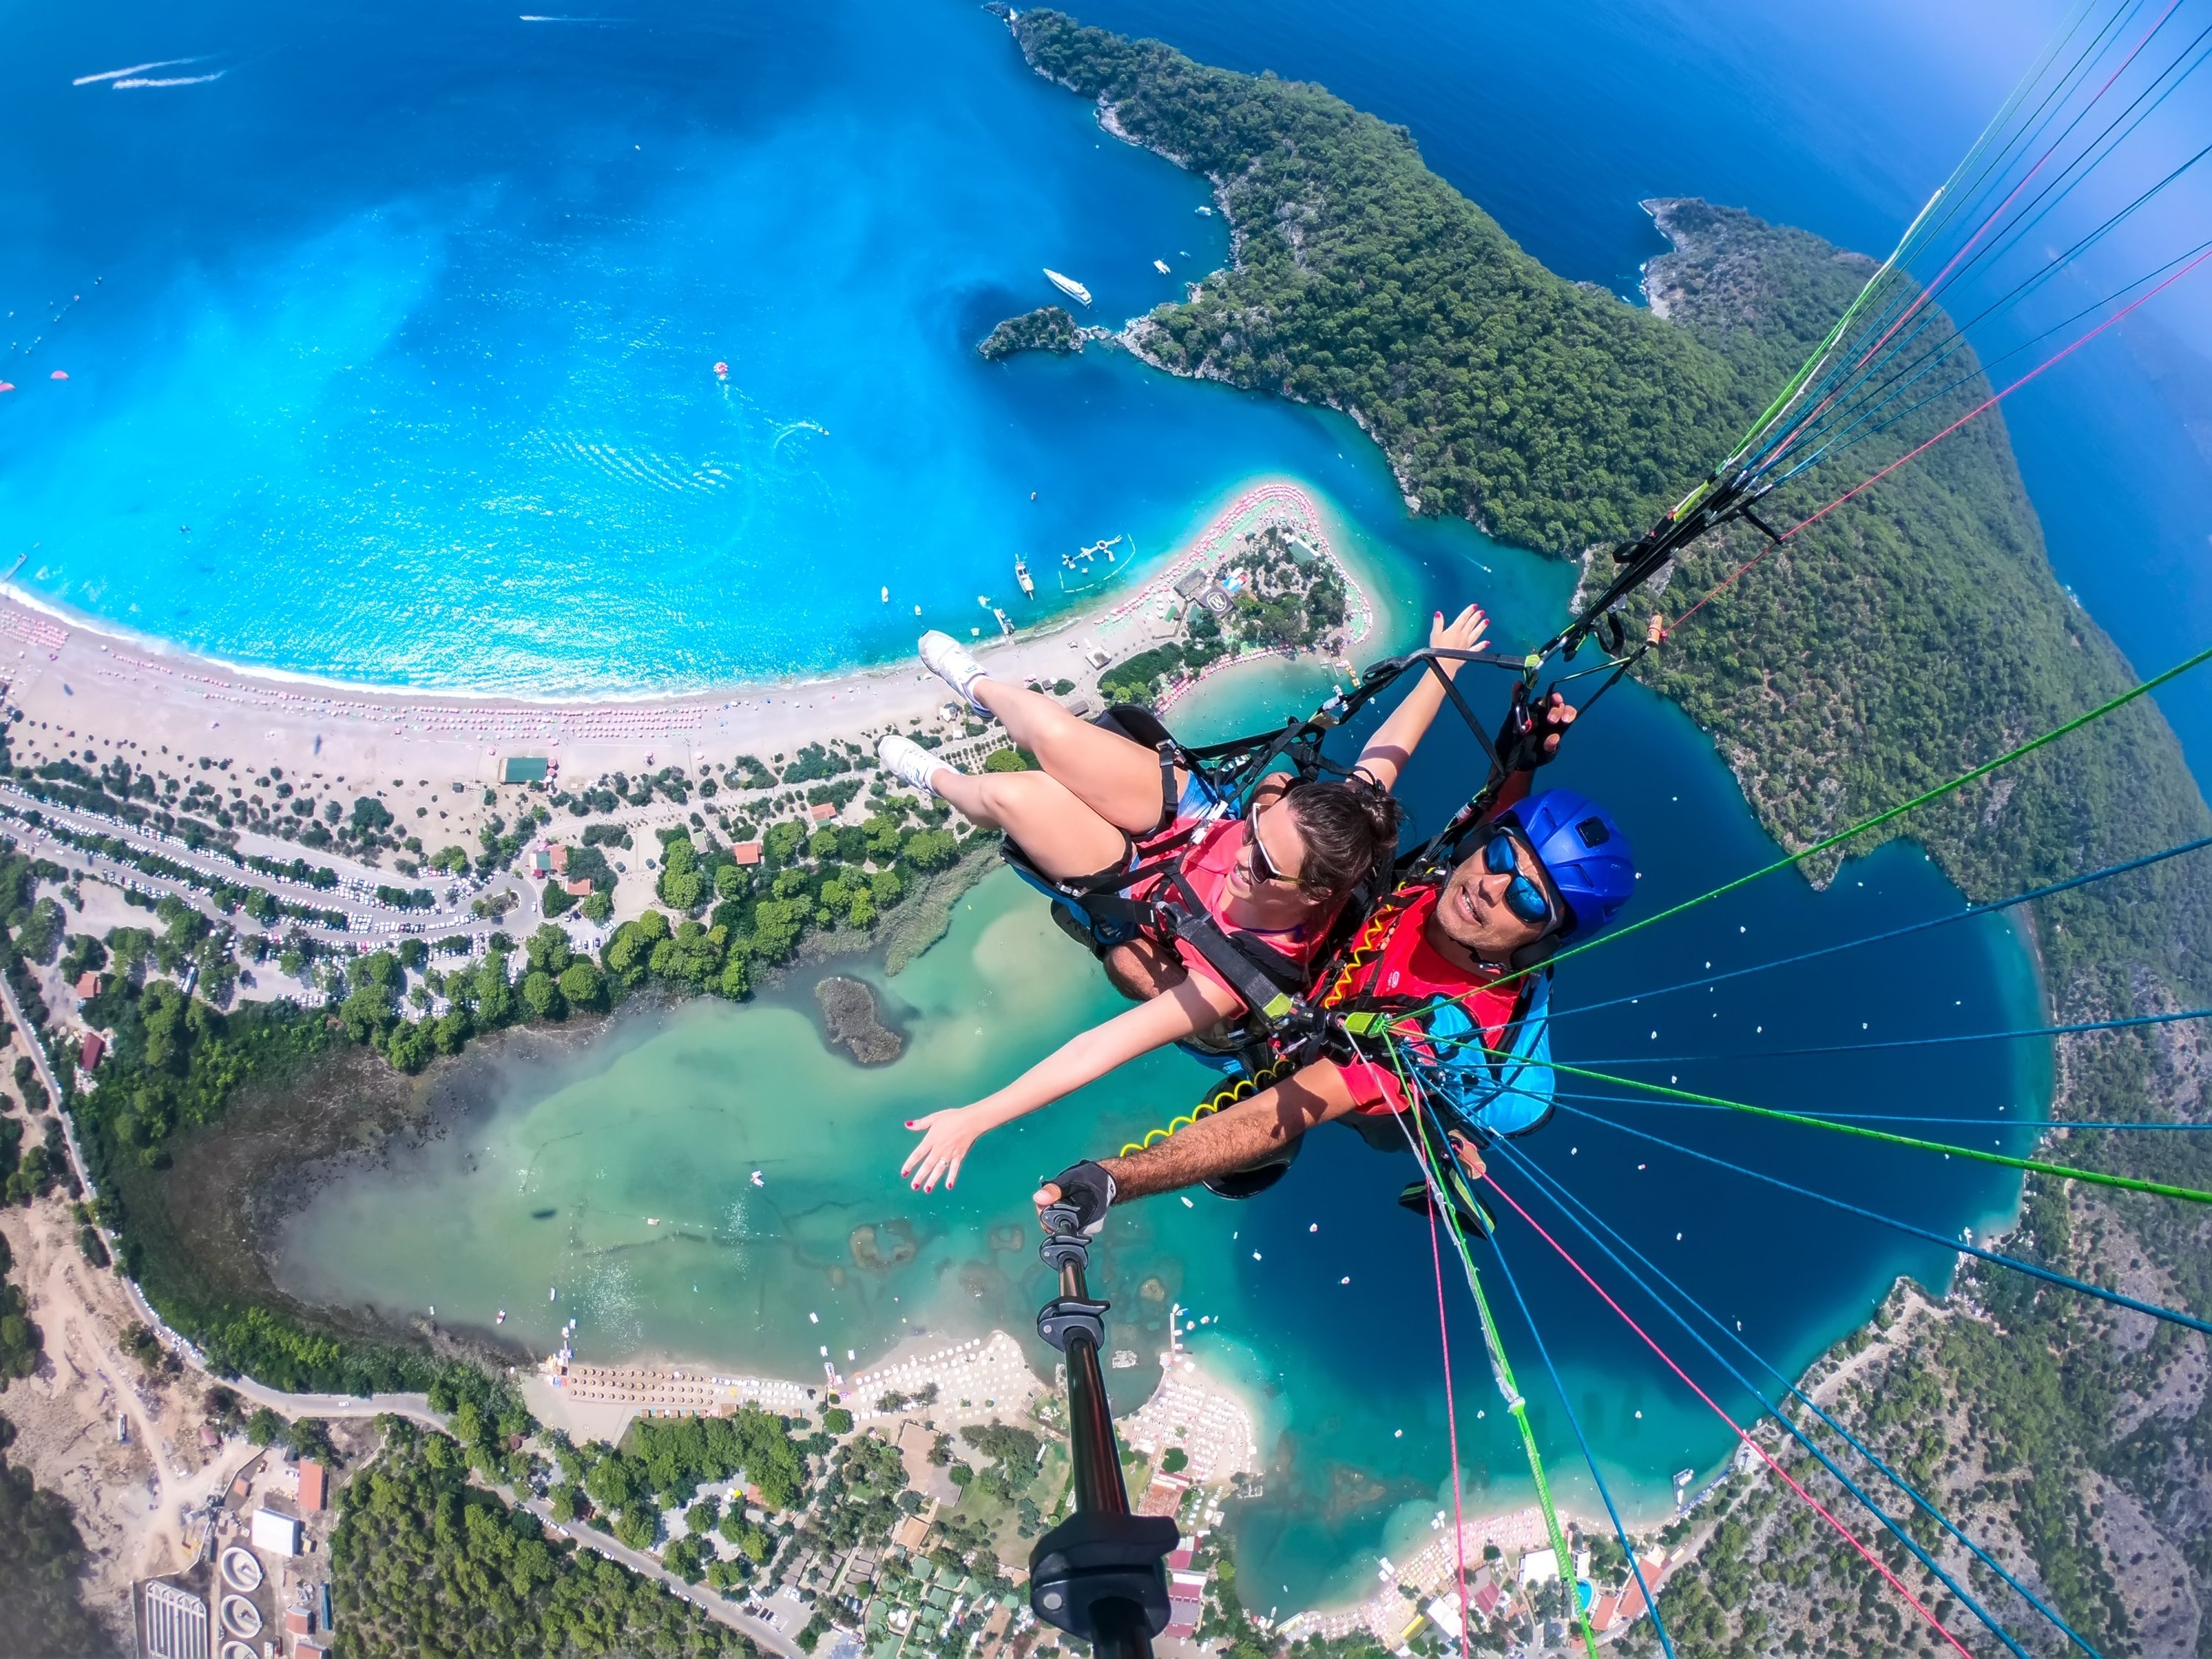 Paragliders tandem fly over the sea with its beautiful clear blue water and mountains in Ölüdeniz, Turkey,  Aug. 4, 2018. (Shutterstock Photo)